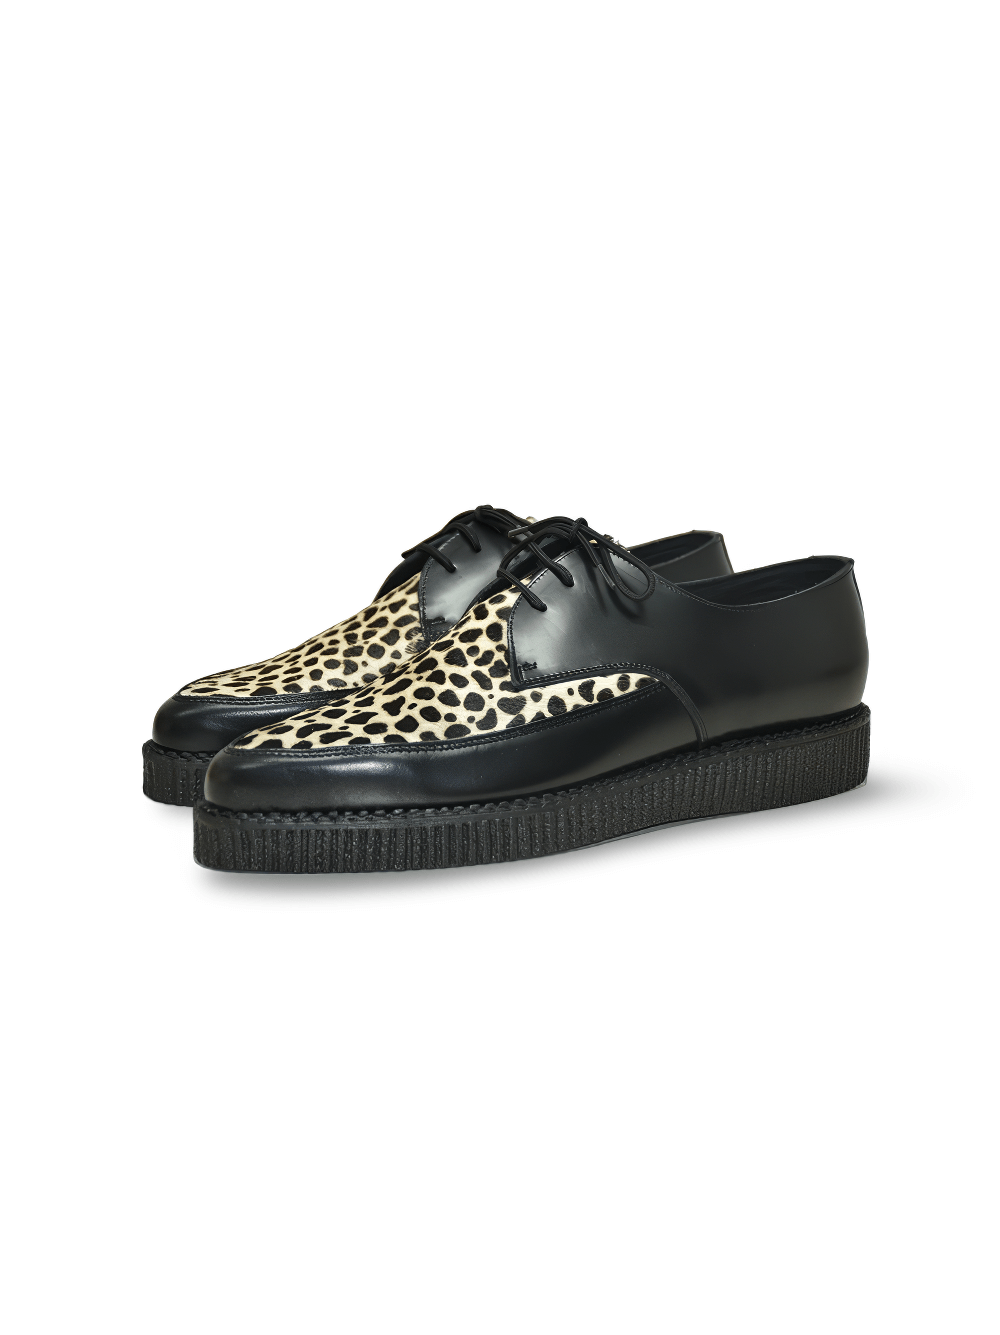 Markante spitze Creepers-Schuhe mit Leopardenmuster aus Fell